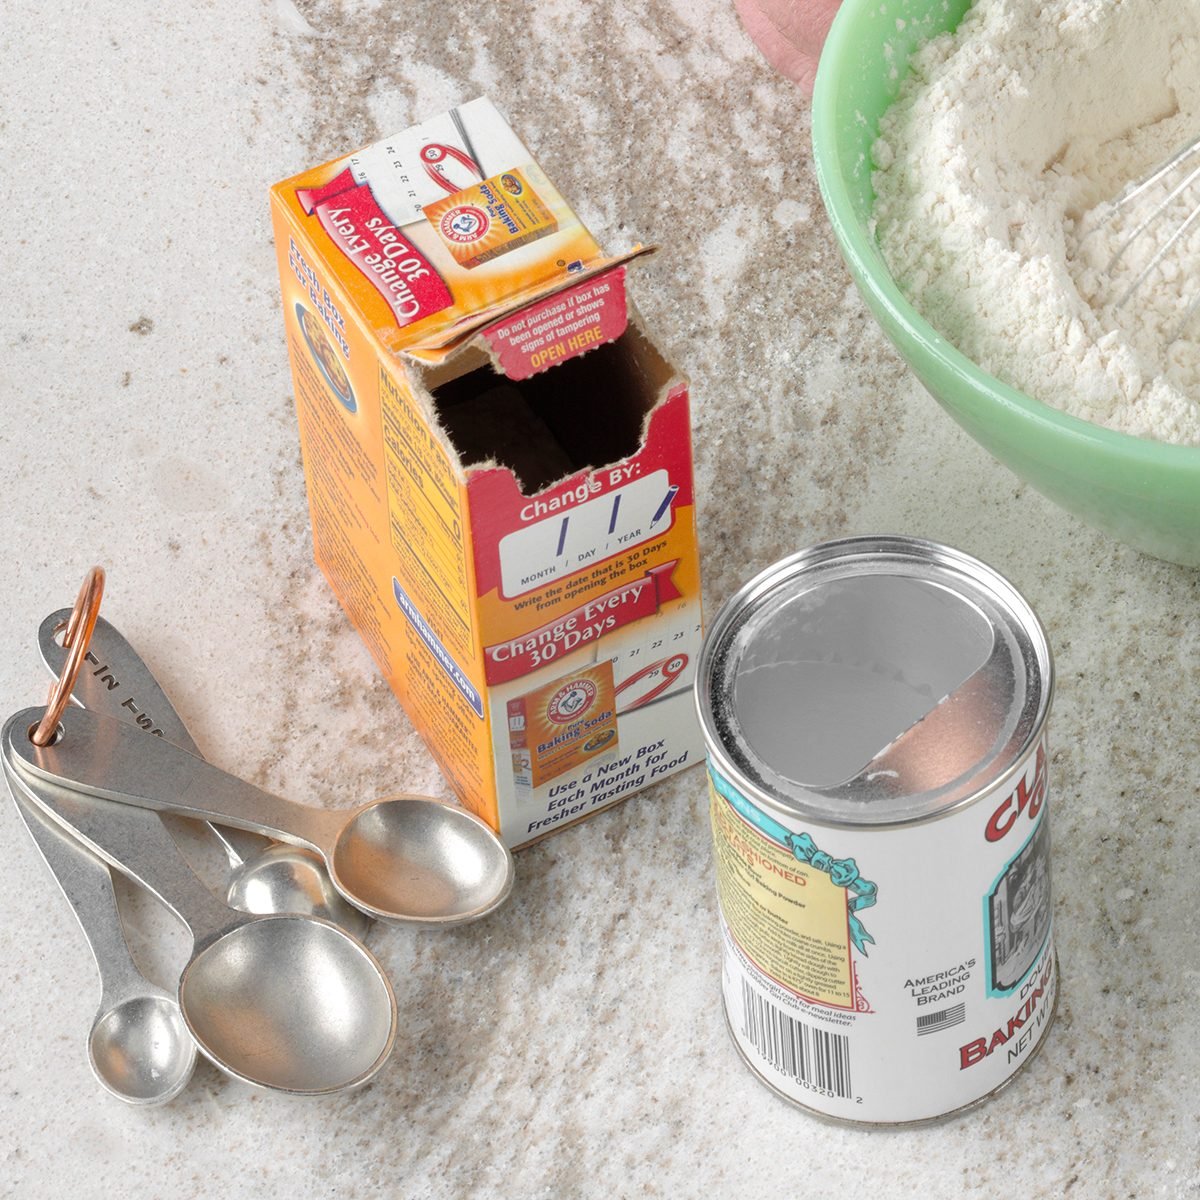 How Does Baking Powder Work in Cooking?